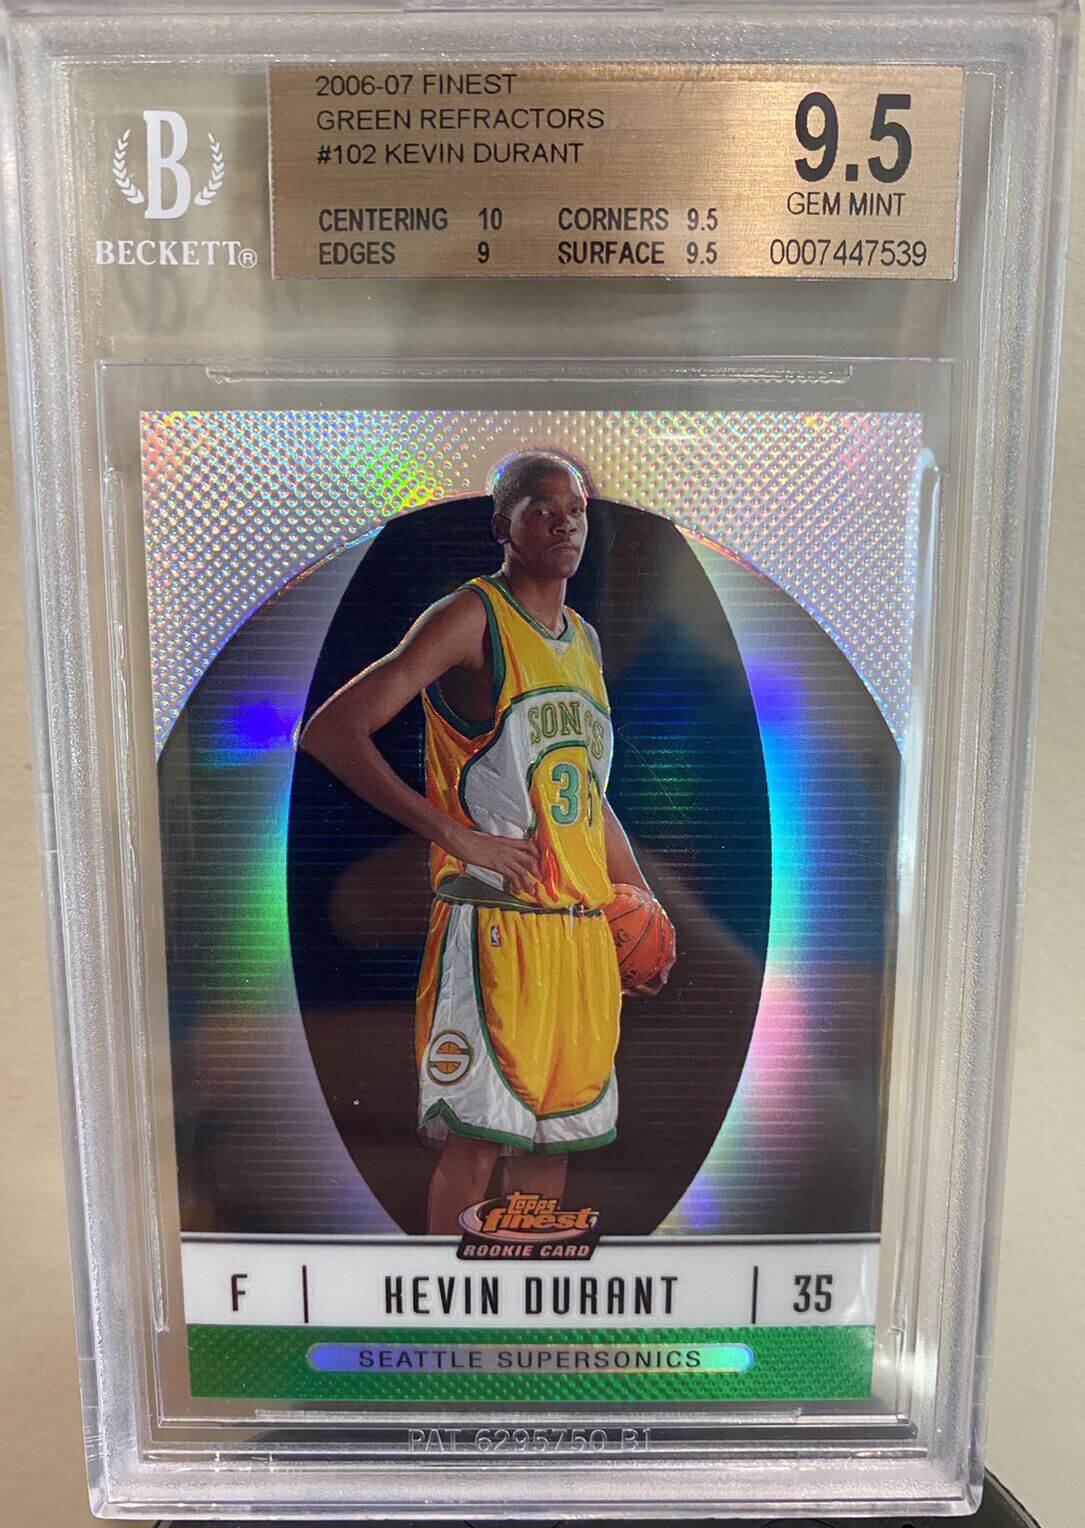 KEVIN DURANT 2006-07 FINEST 102 ROOKIE RC GREEN REFRACTOR #/199 BGS 9.5 GEM MINT